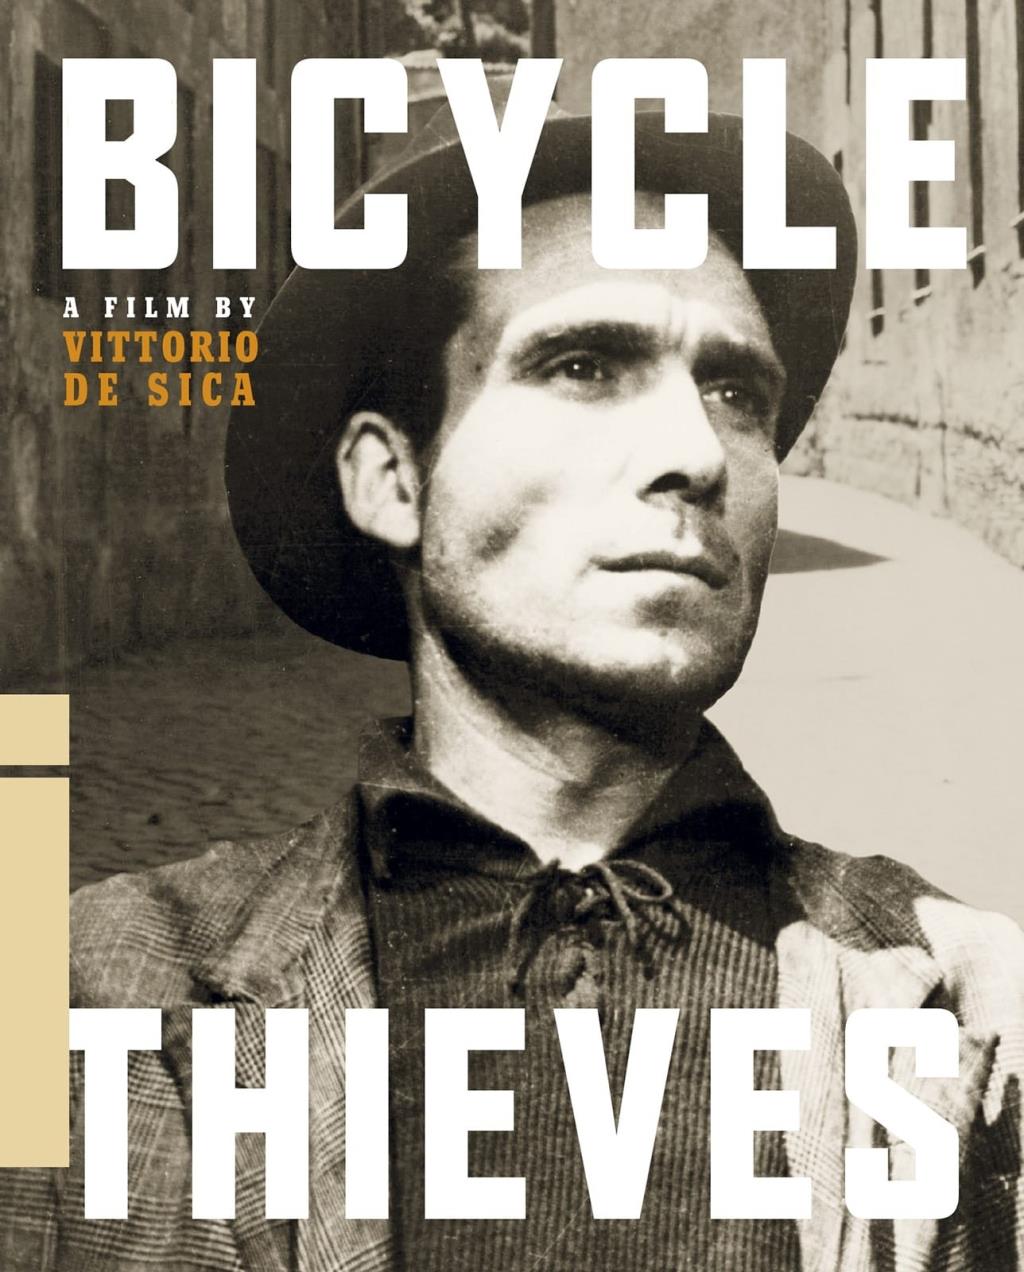 Bicycle Thieves Criterion cover